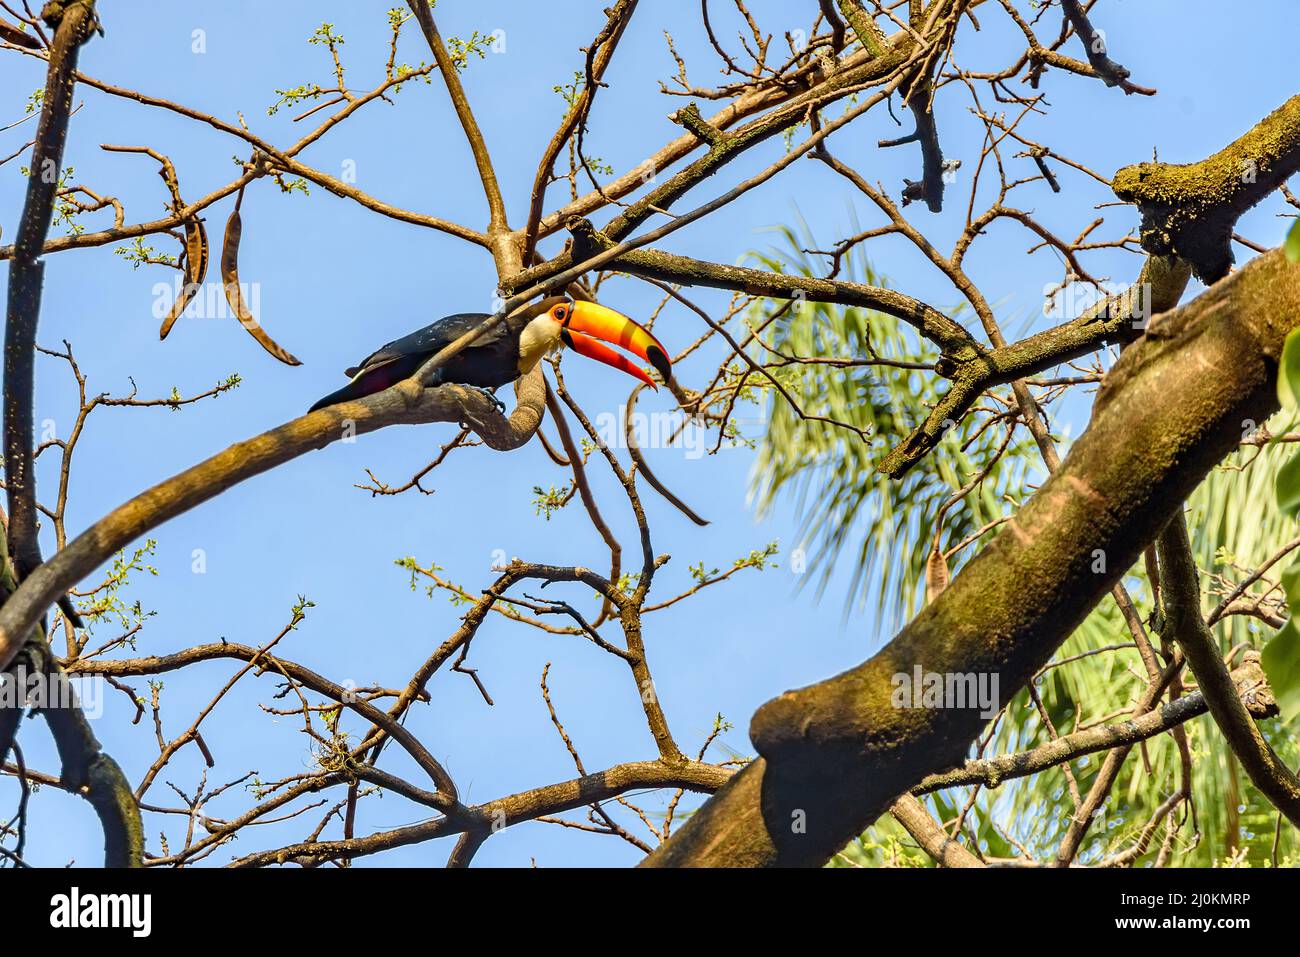 Toucan perched among vegetation Stock Photo